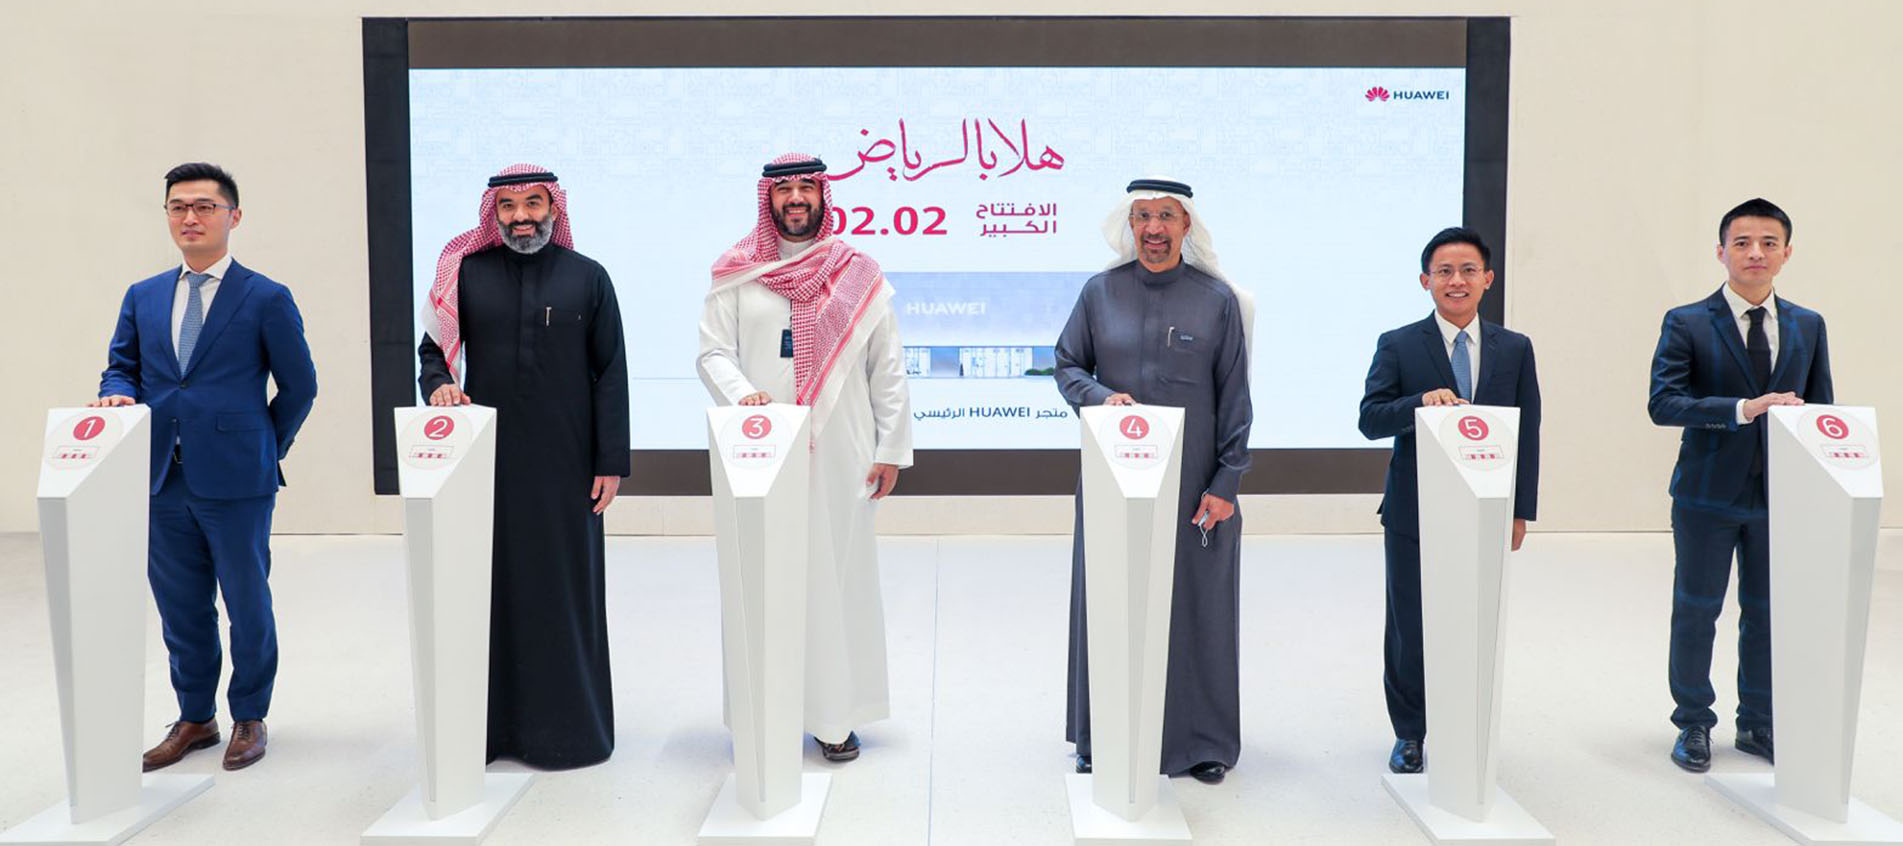 Huawei's Largest Flagship Store Has Officially Opened in Riyadh Front